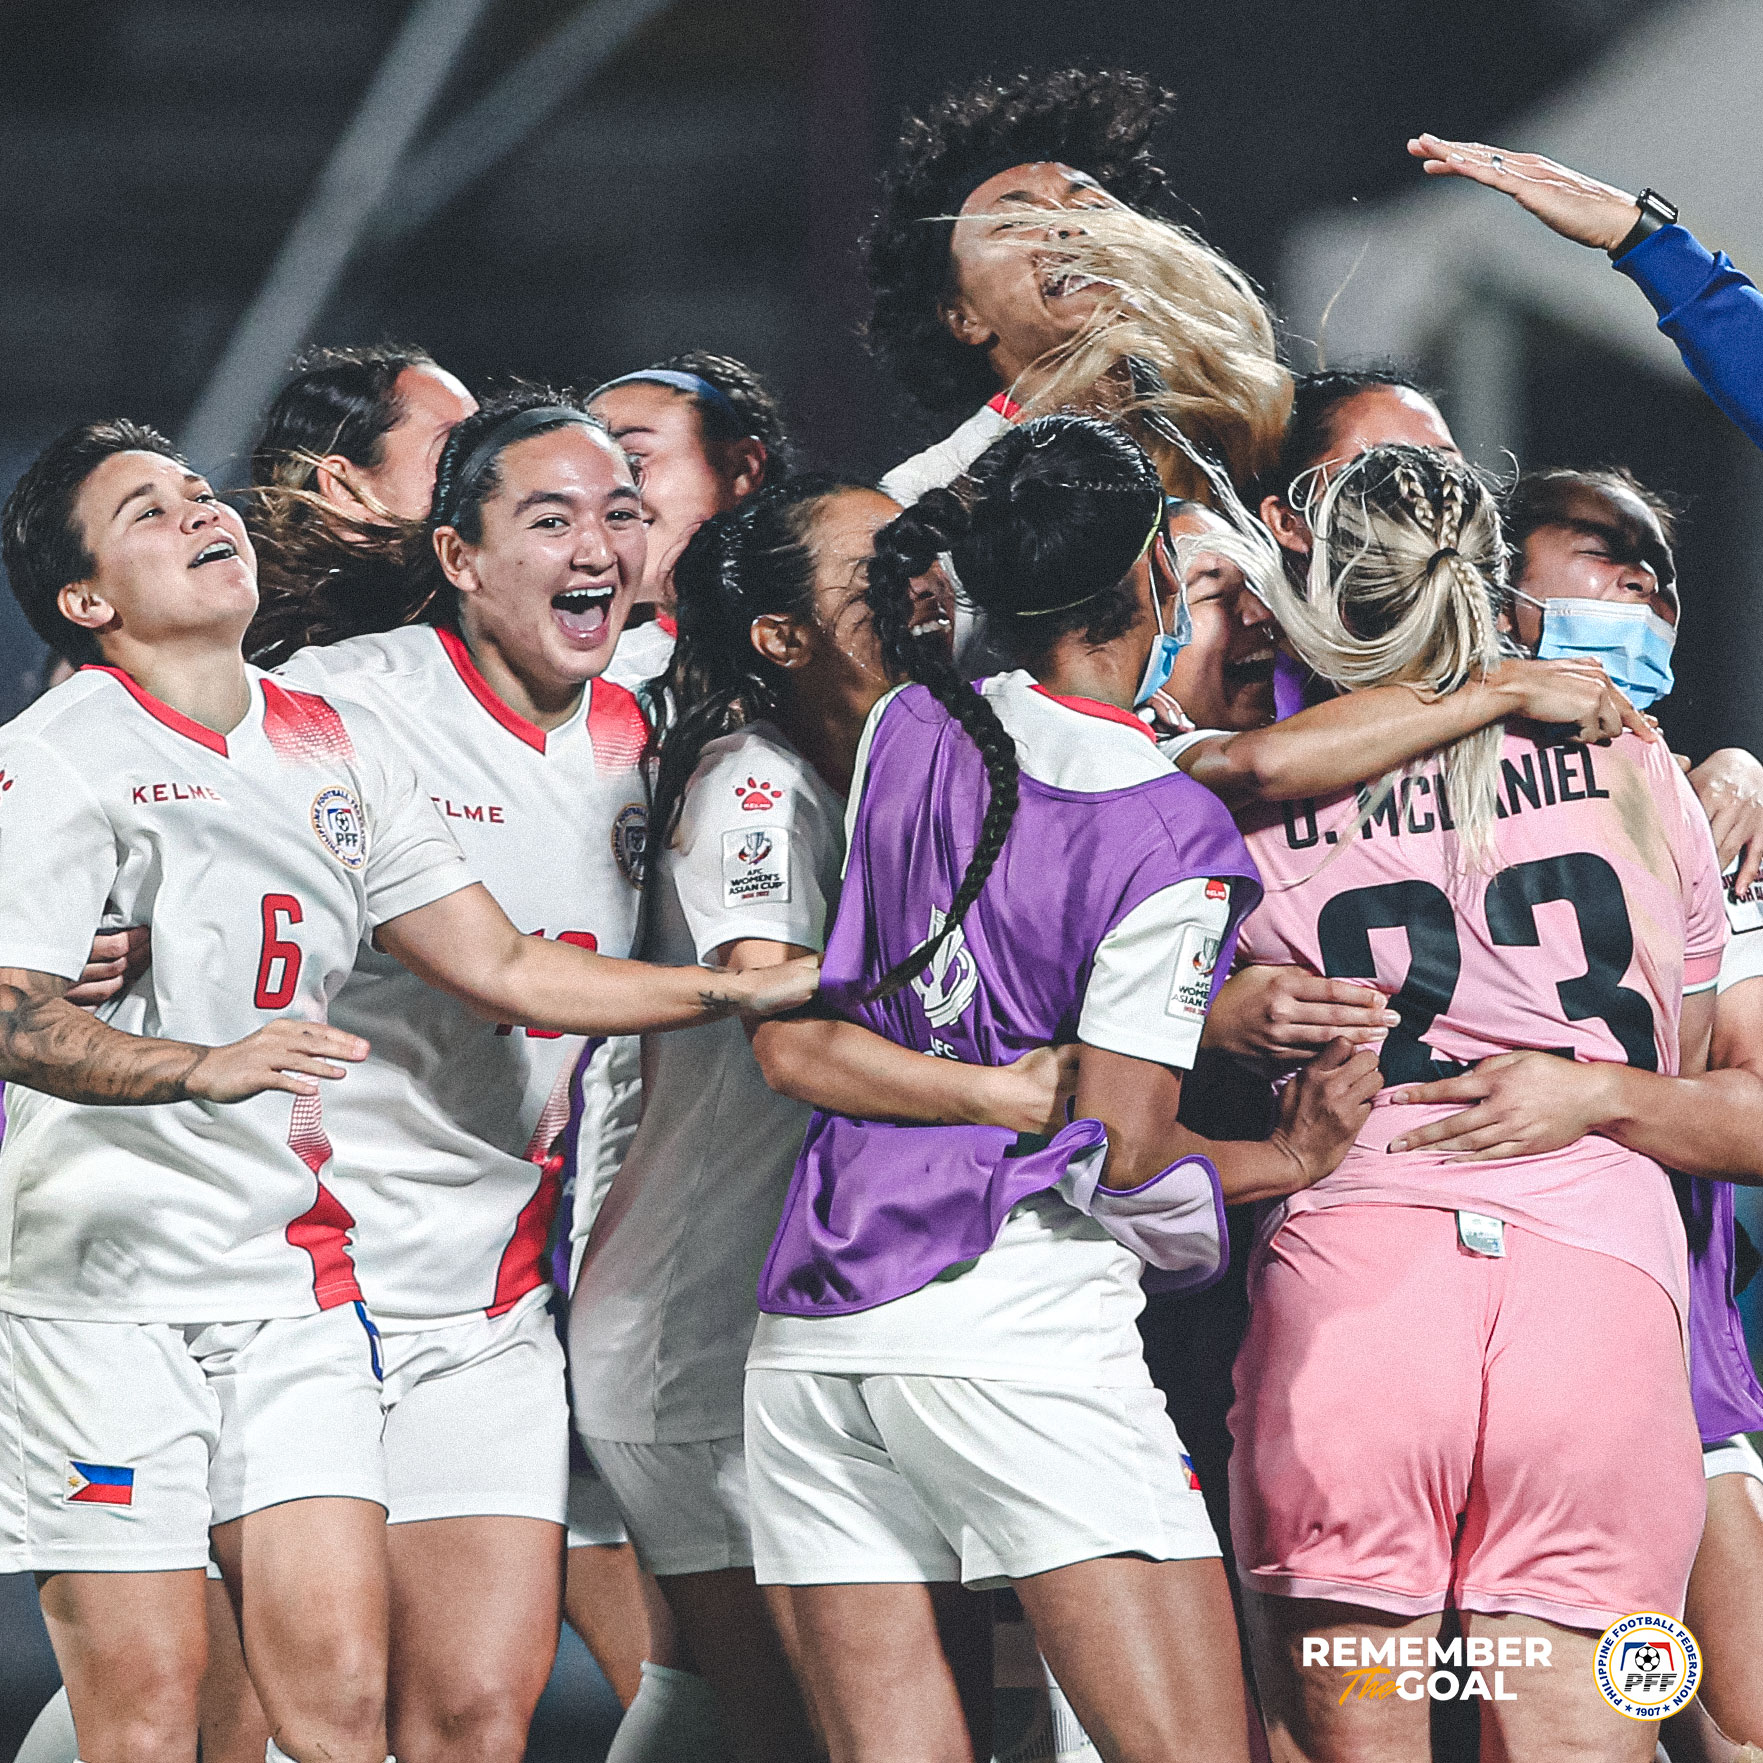 Philippine women's football team celebrate win over Chinese Taipei that sent the country to the World Cup for the first time.